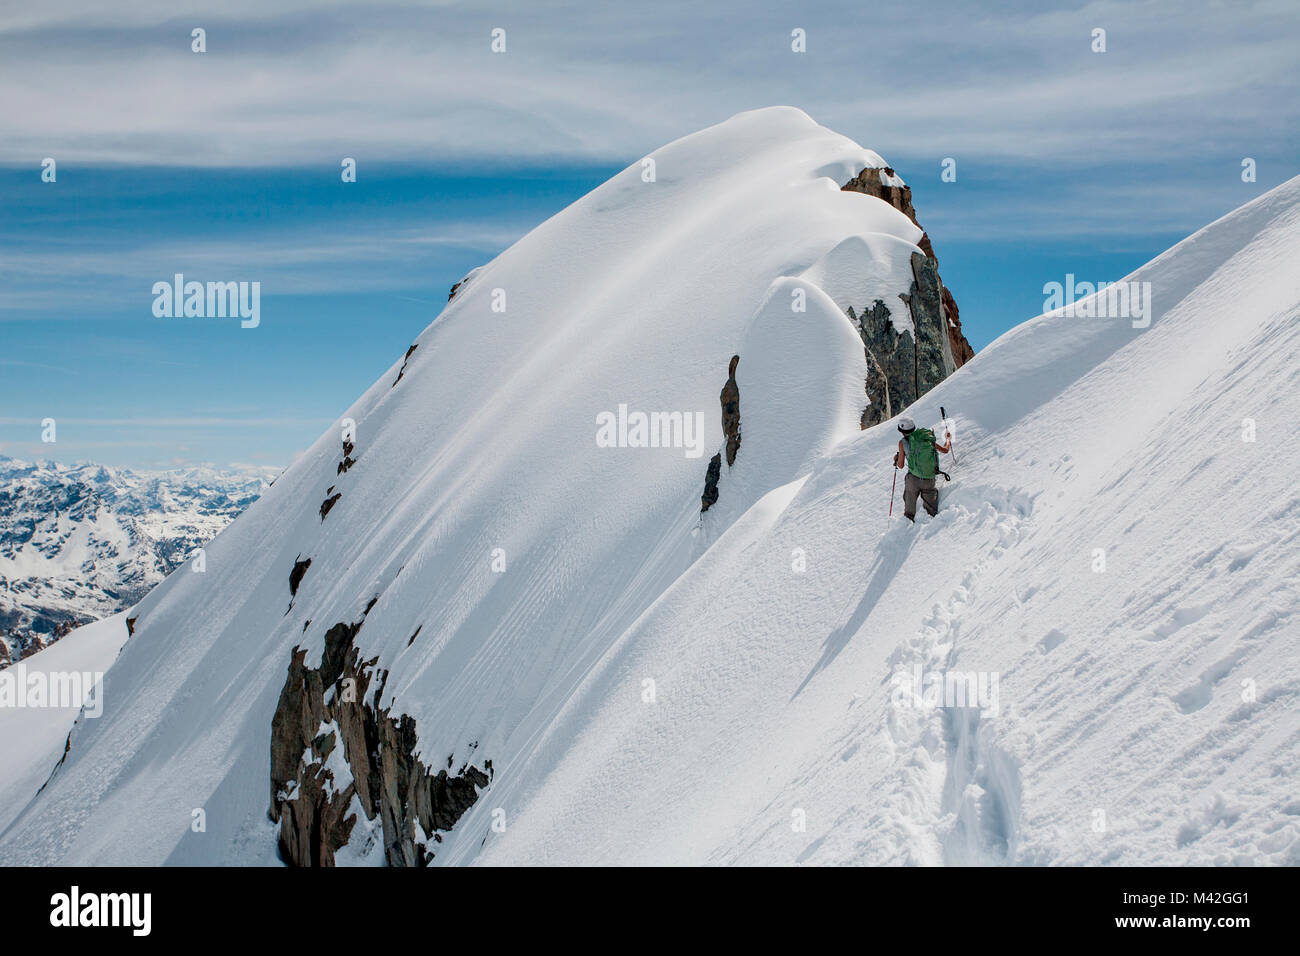 Mountainering at Kennedy peak, Malenco valley, Lombardy, Italy Stock Photo